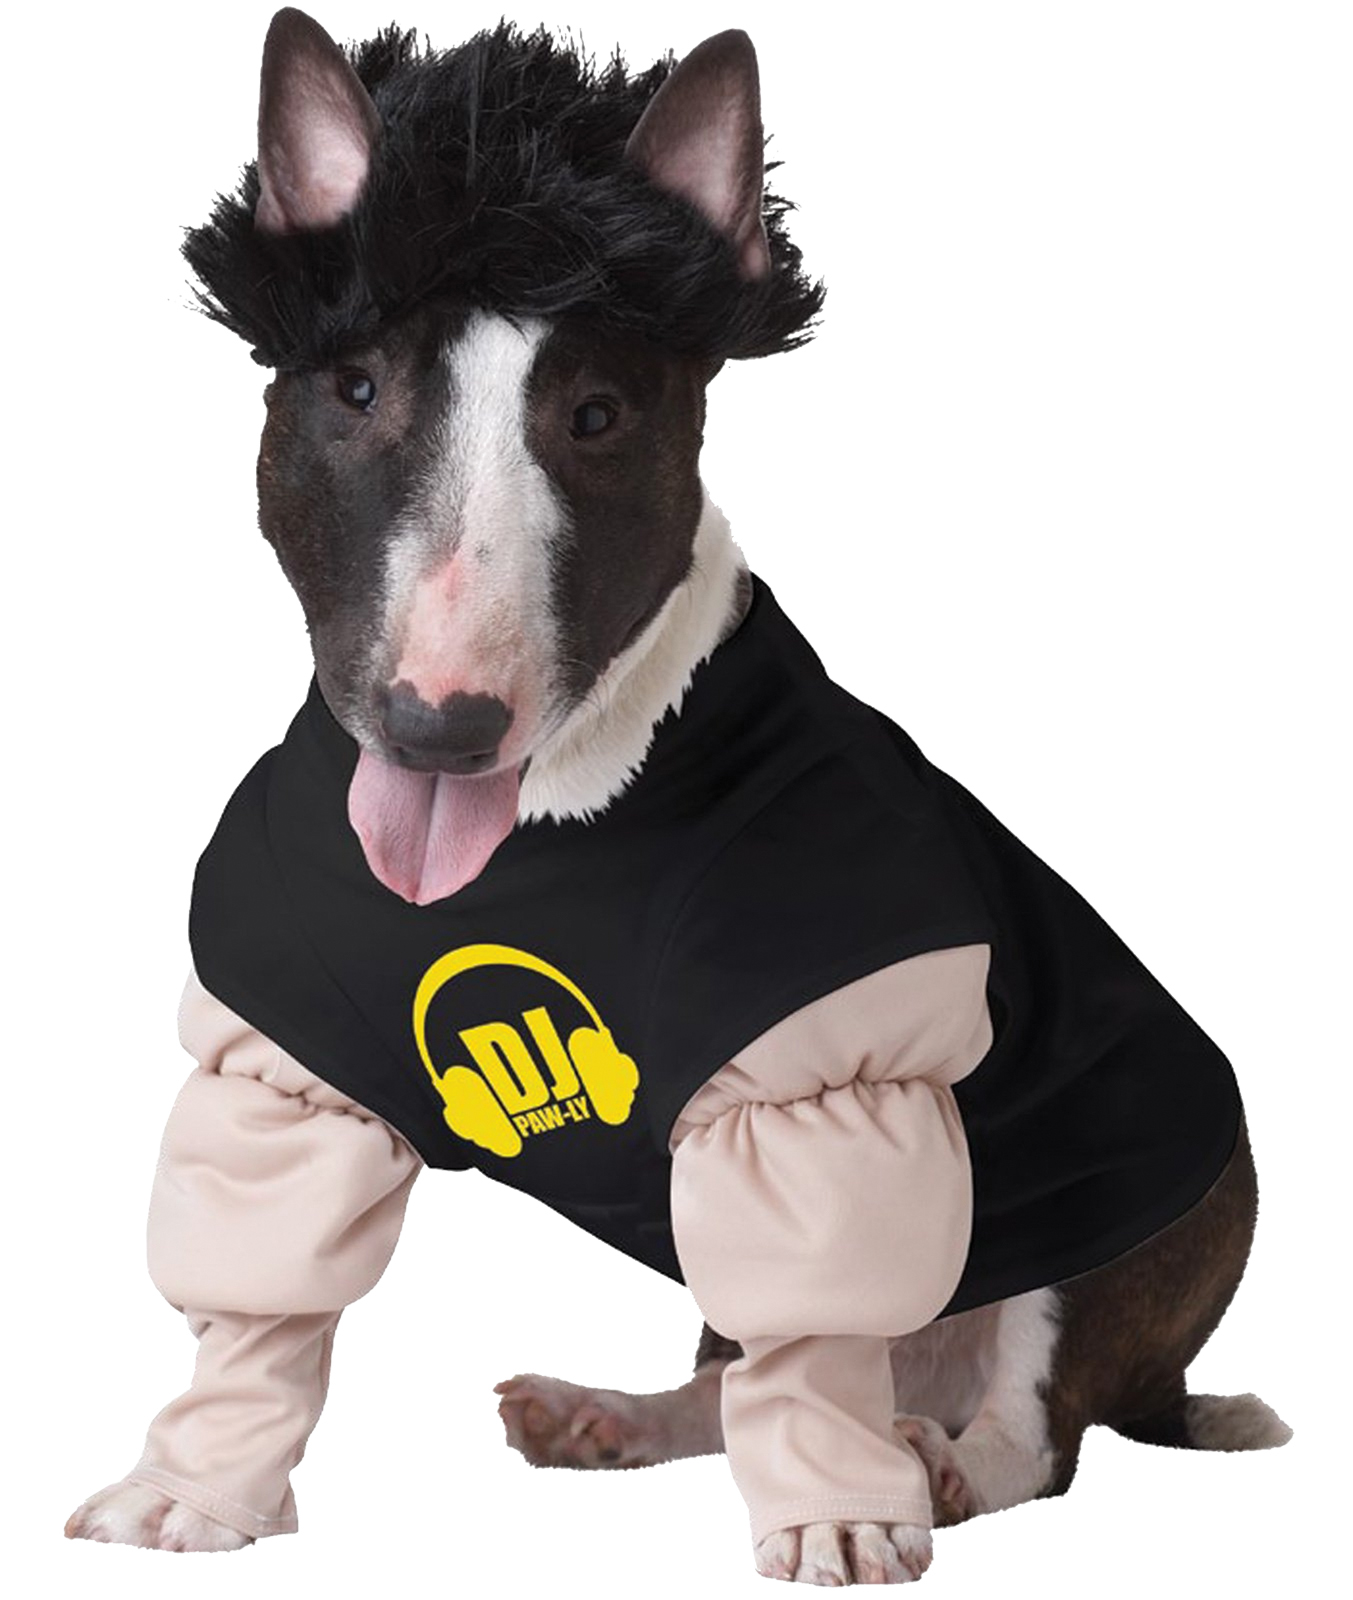 English Bull Terrier in DJ outfit